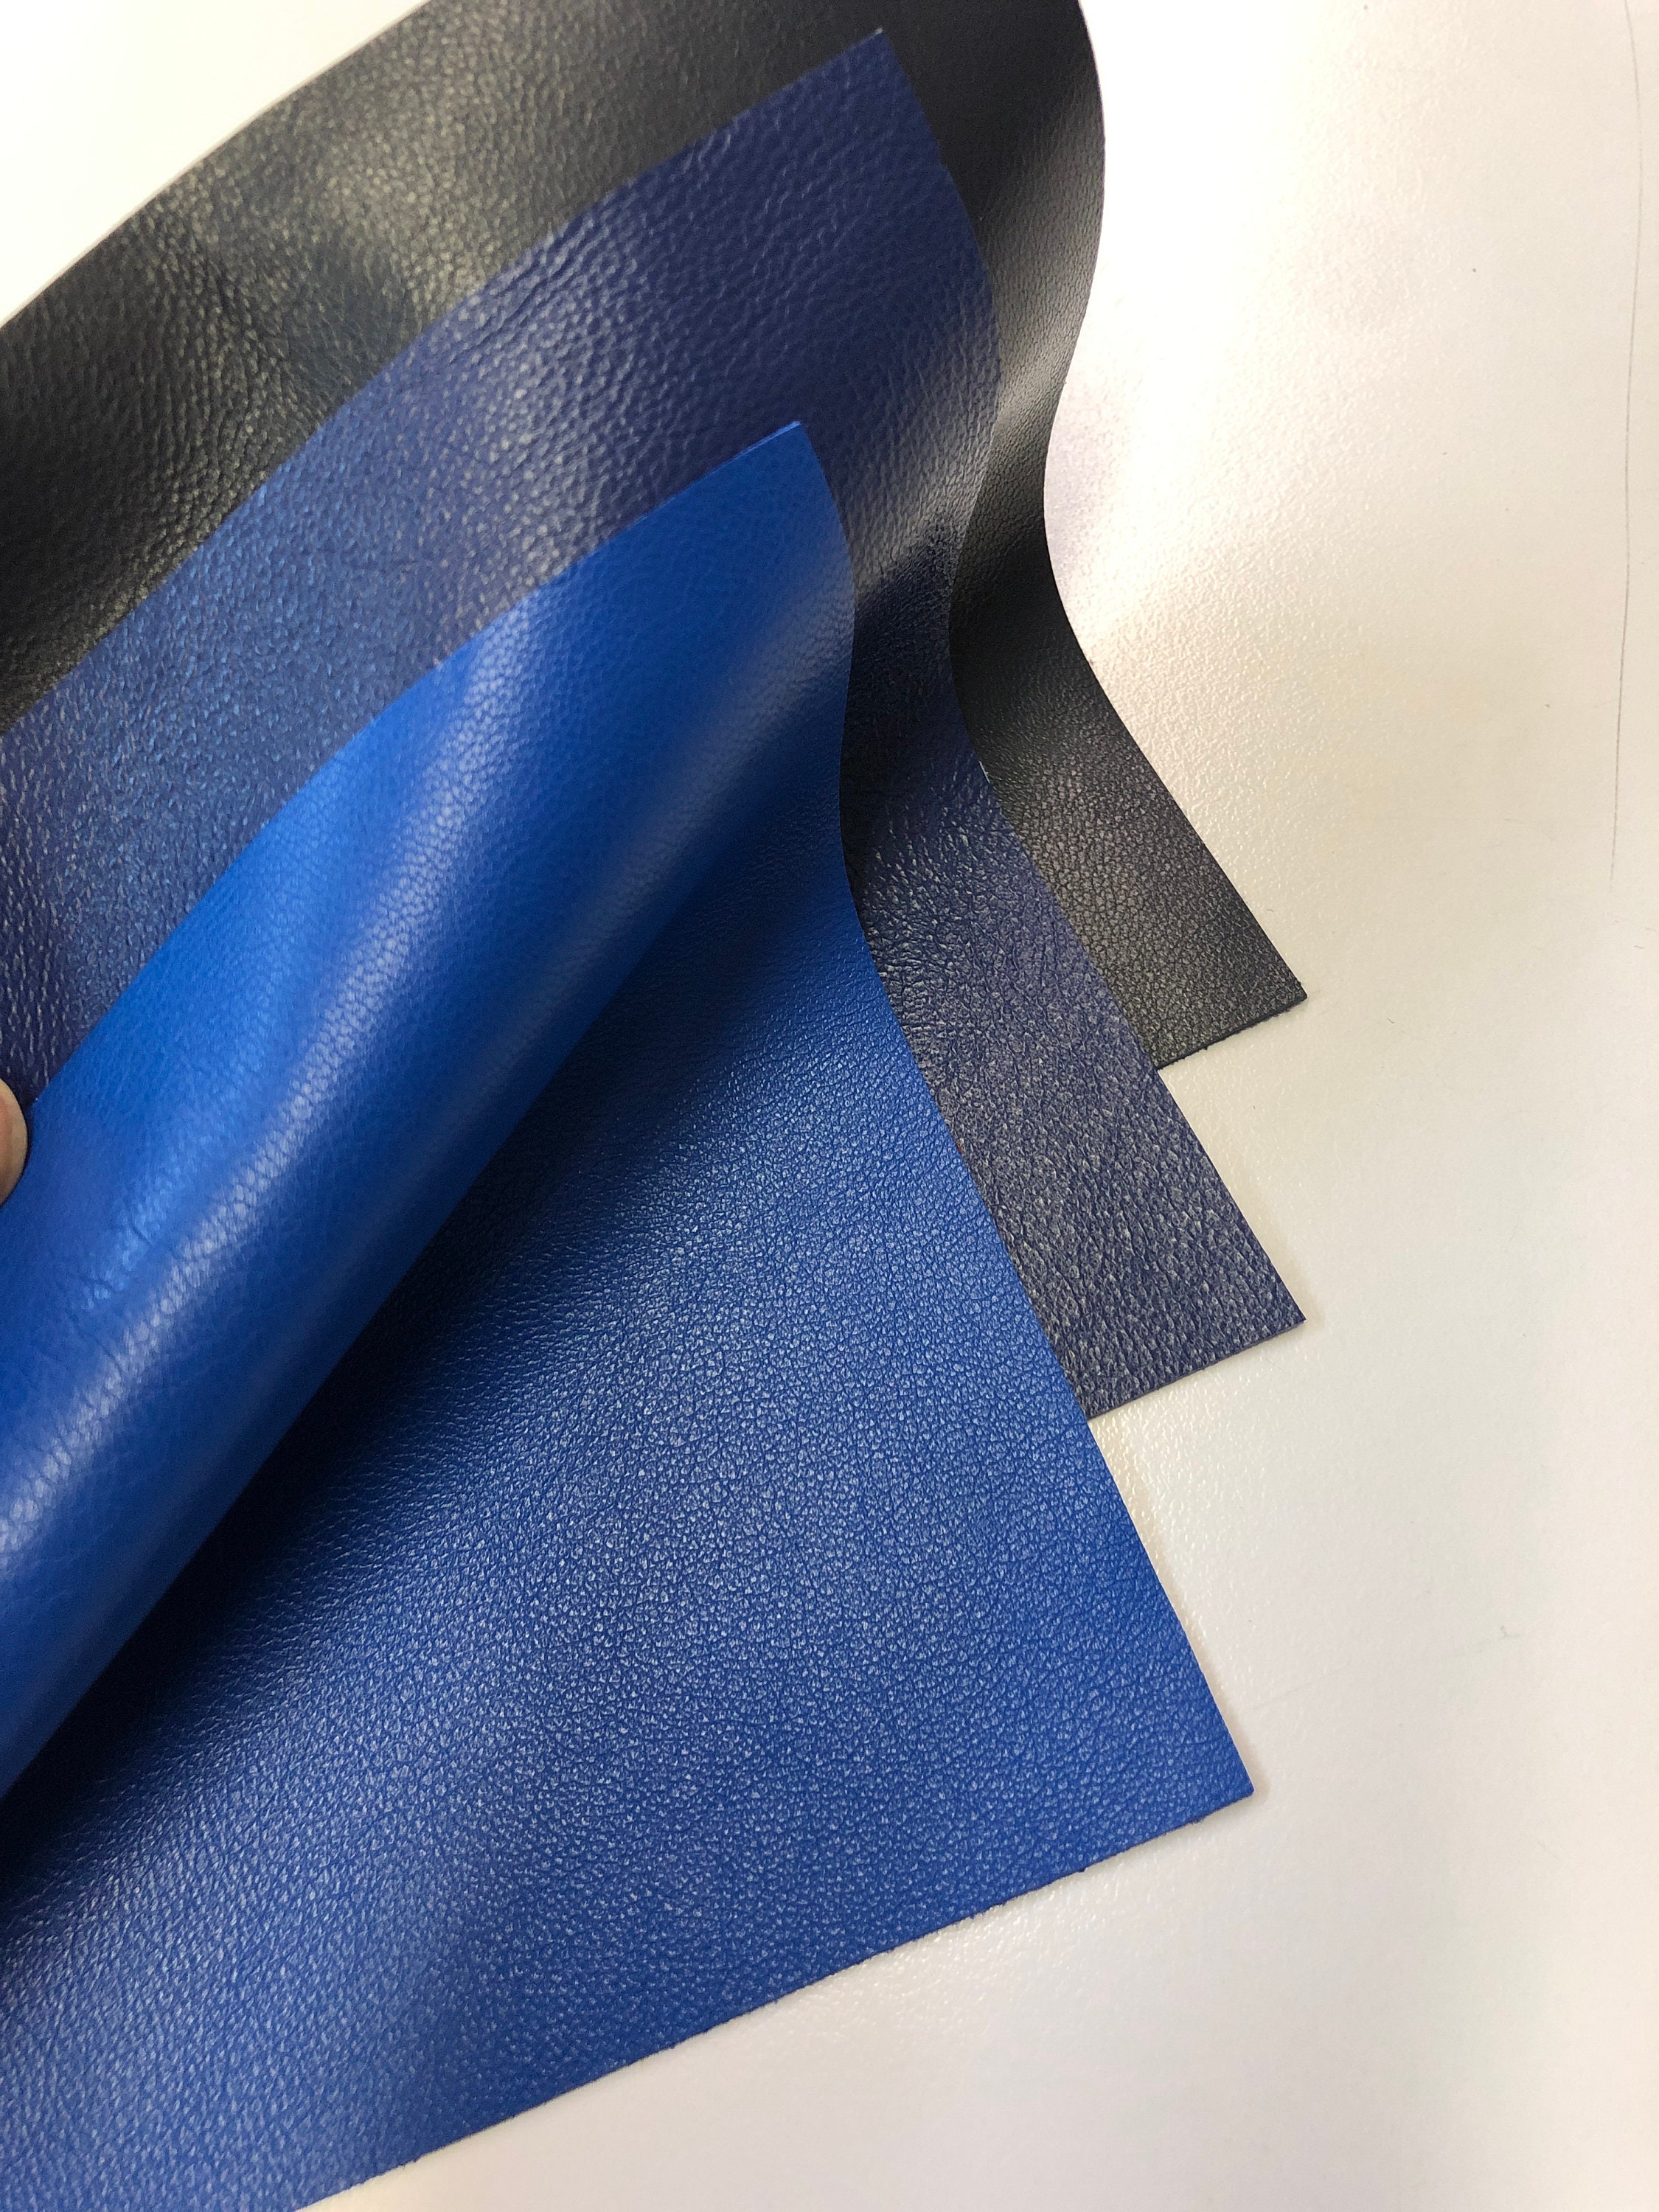 BLUE Leather Scraps Real Soft Sheep Skin Pieces for Crafts Blue Leather  Sheets Genuine Sheep Skin Sheets Earring Material Offcut Scrap Pack 